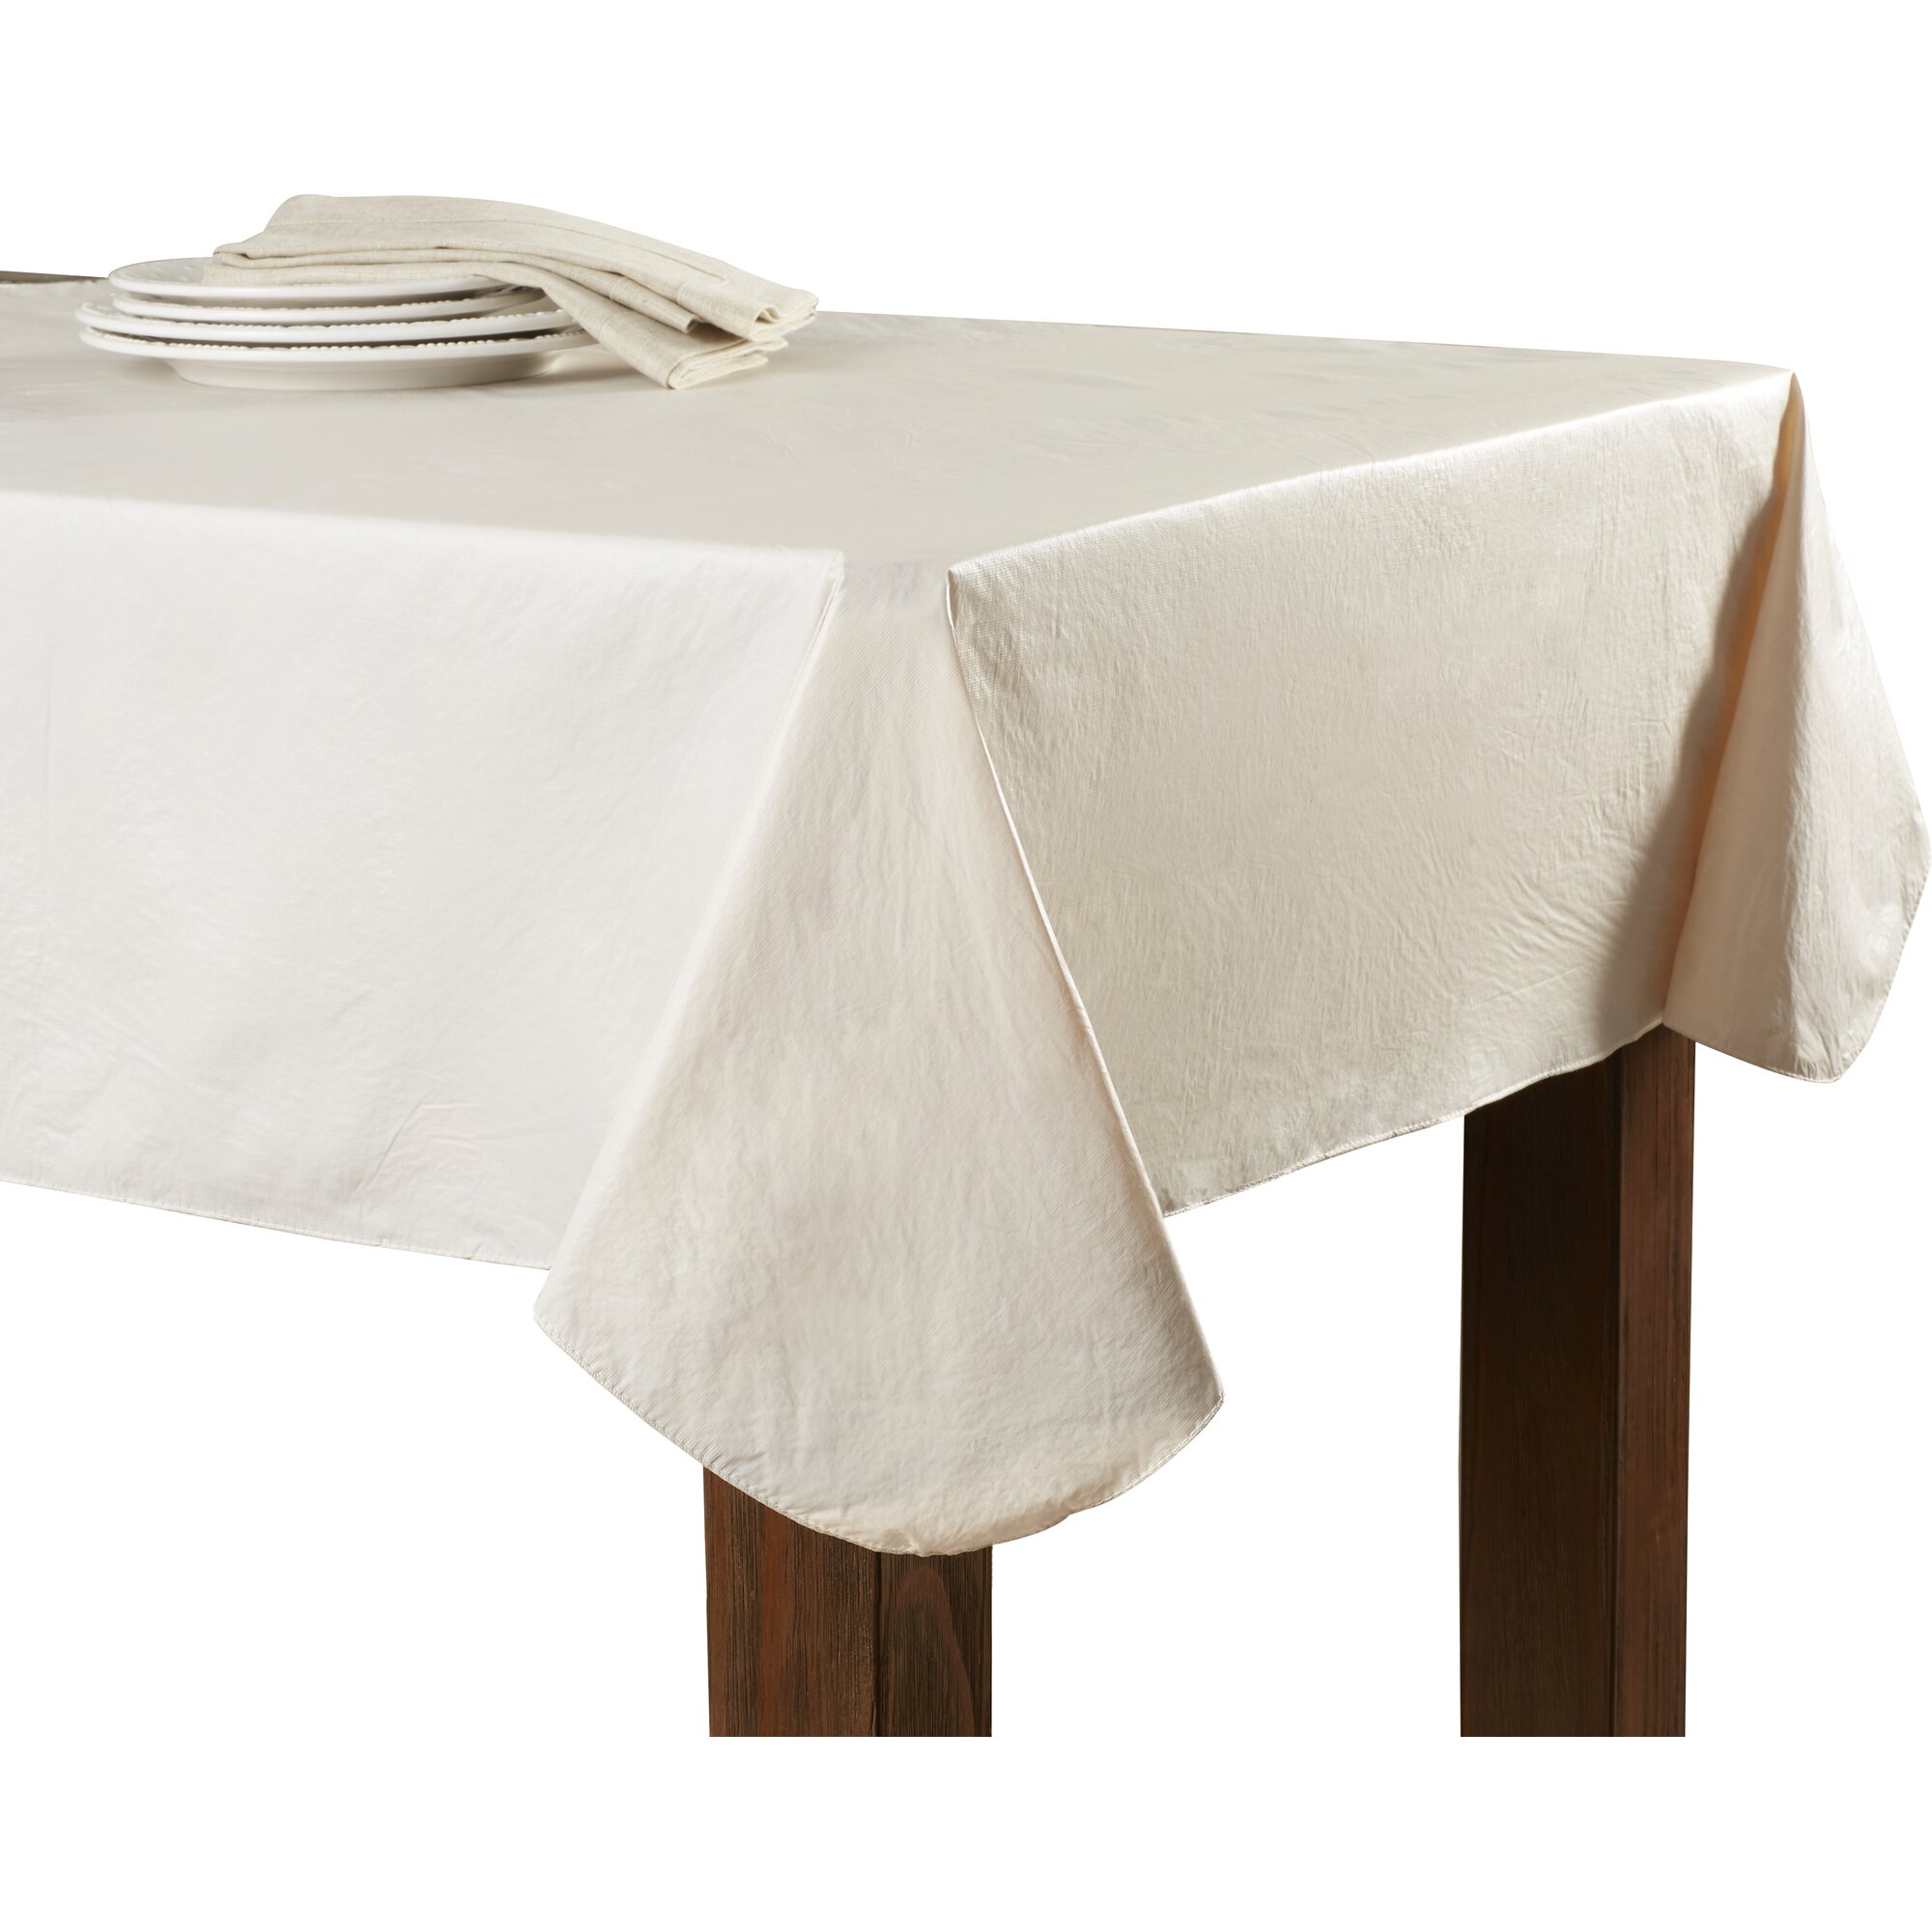 Symple Stuff Vinyl Flannel Backed Tablecloth & Reviews ...